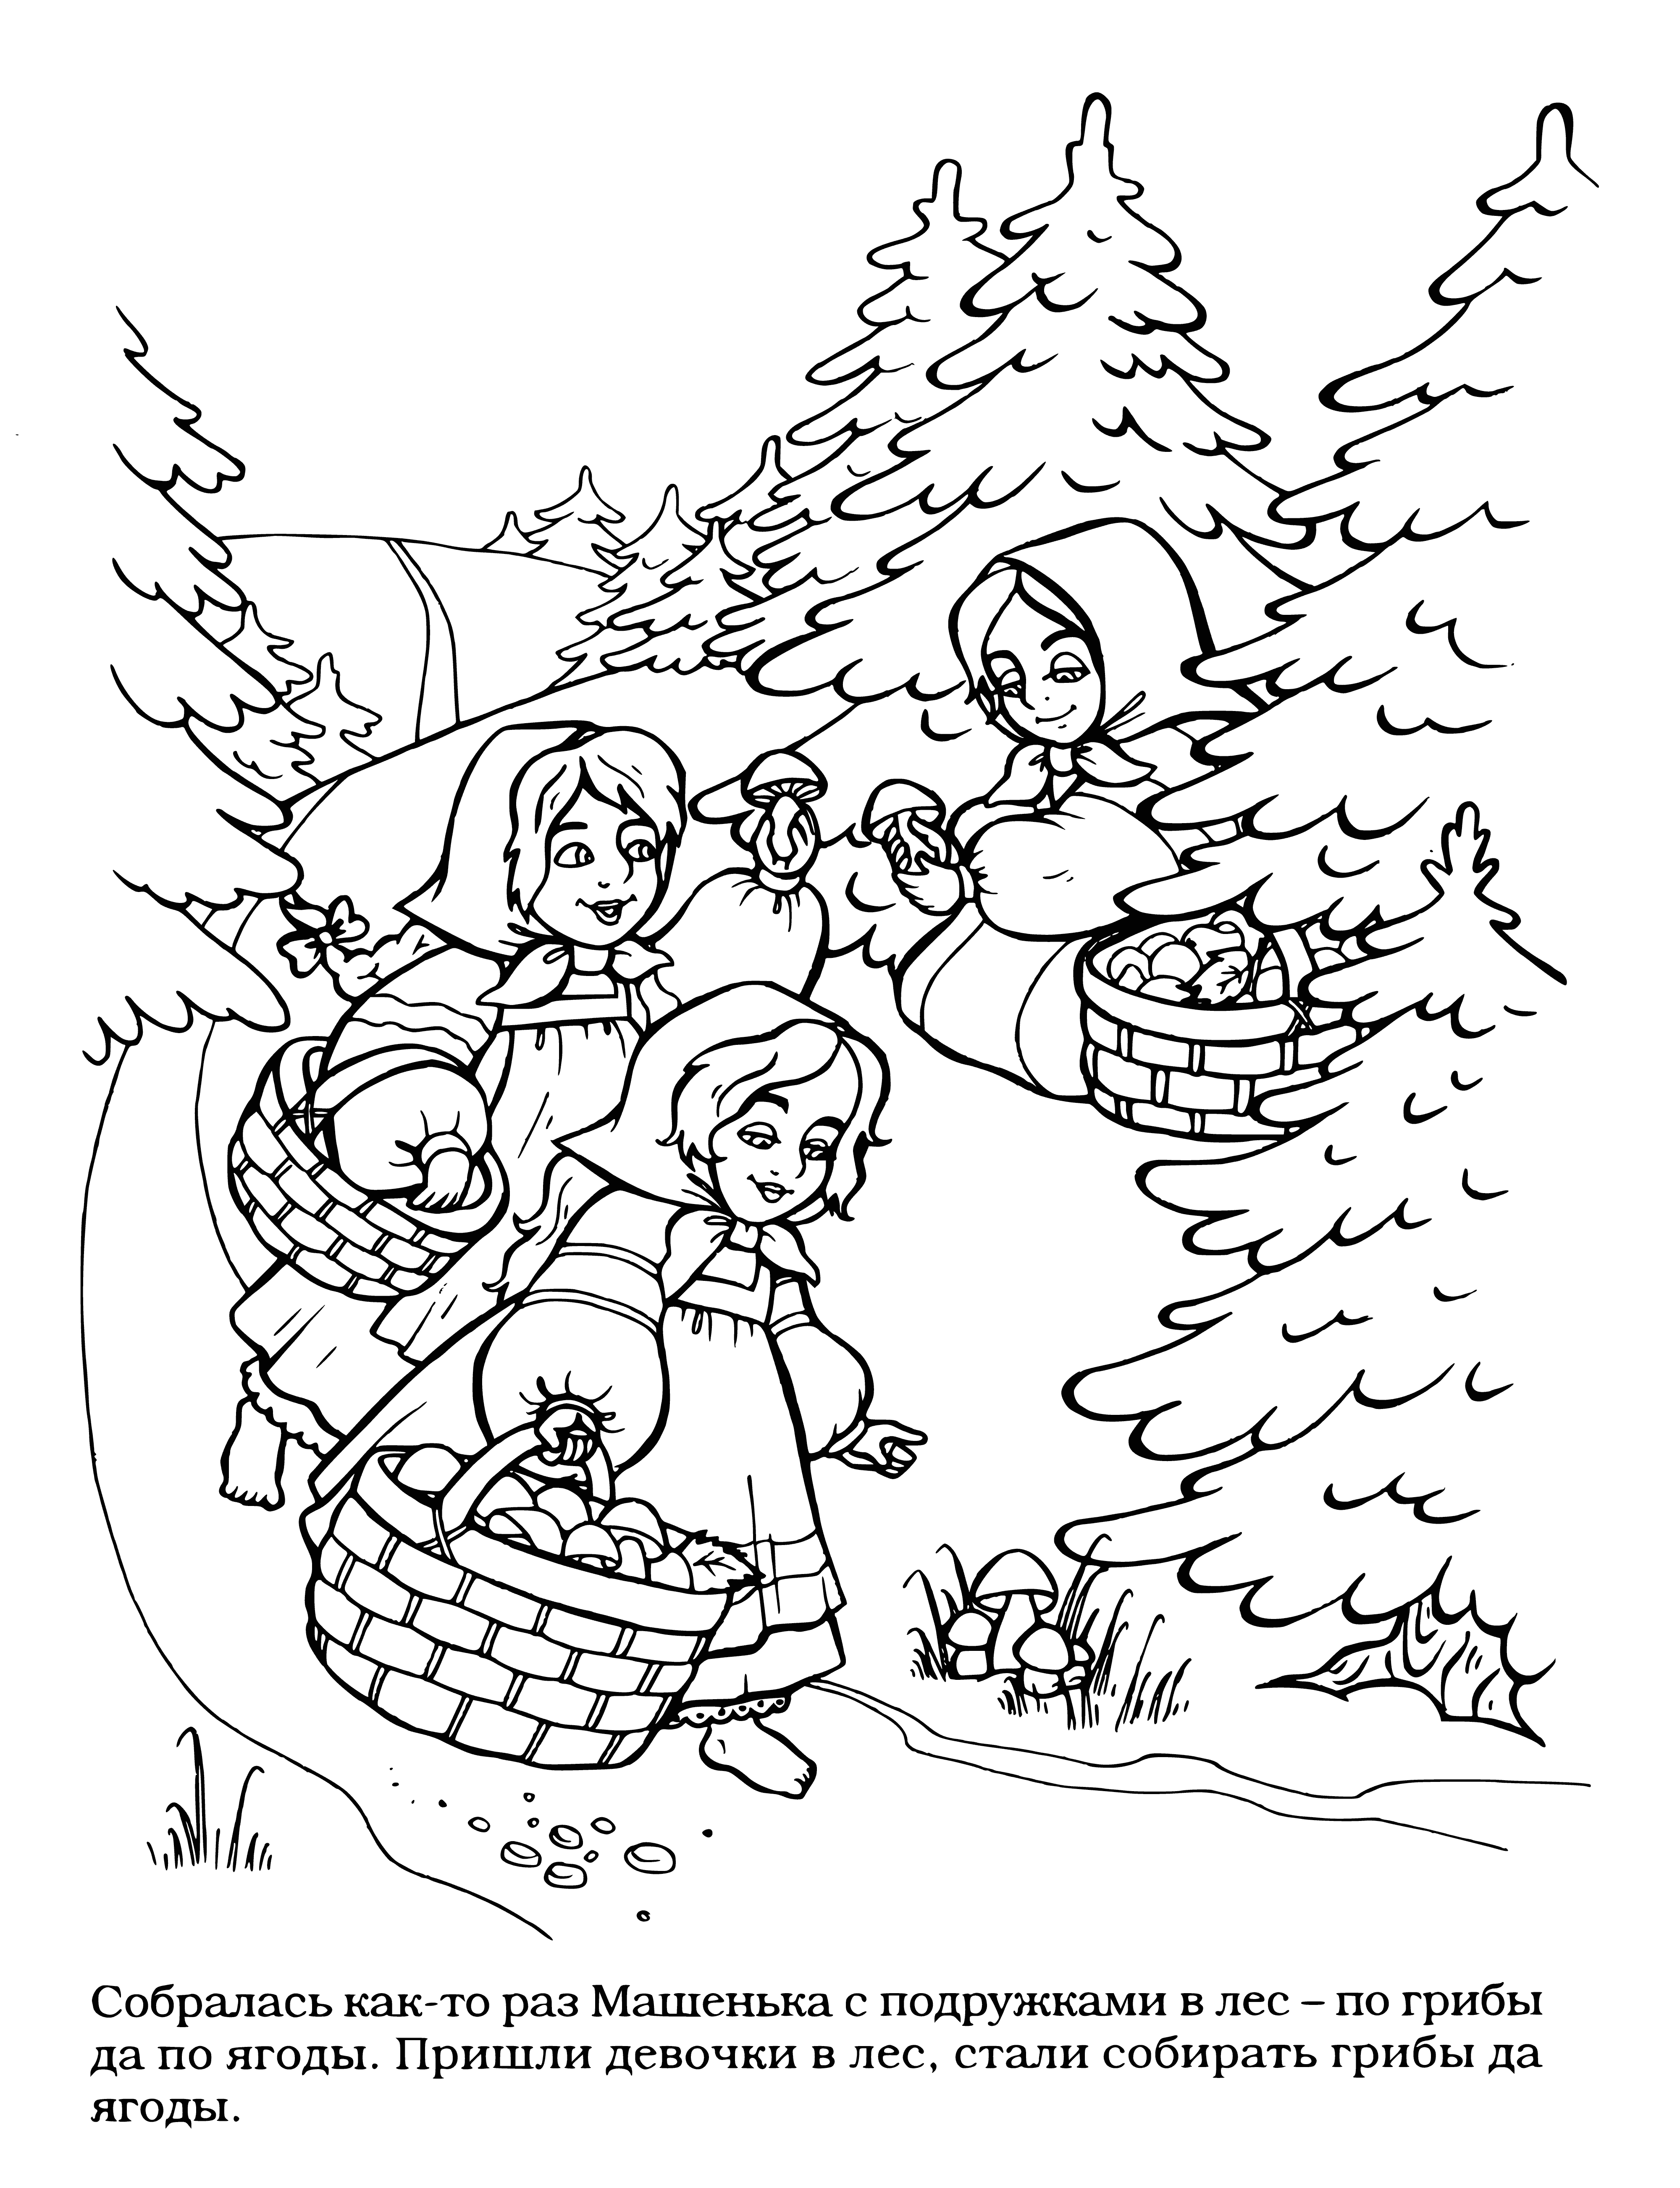 coloring page: Masha walks through a sunny forest looking for mushrooms to add to her basket. A river runs through the trees, creating a peaceful atmosphere.